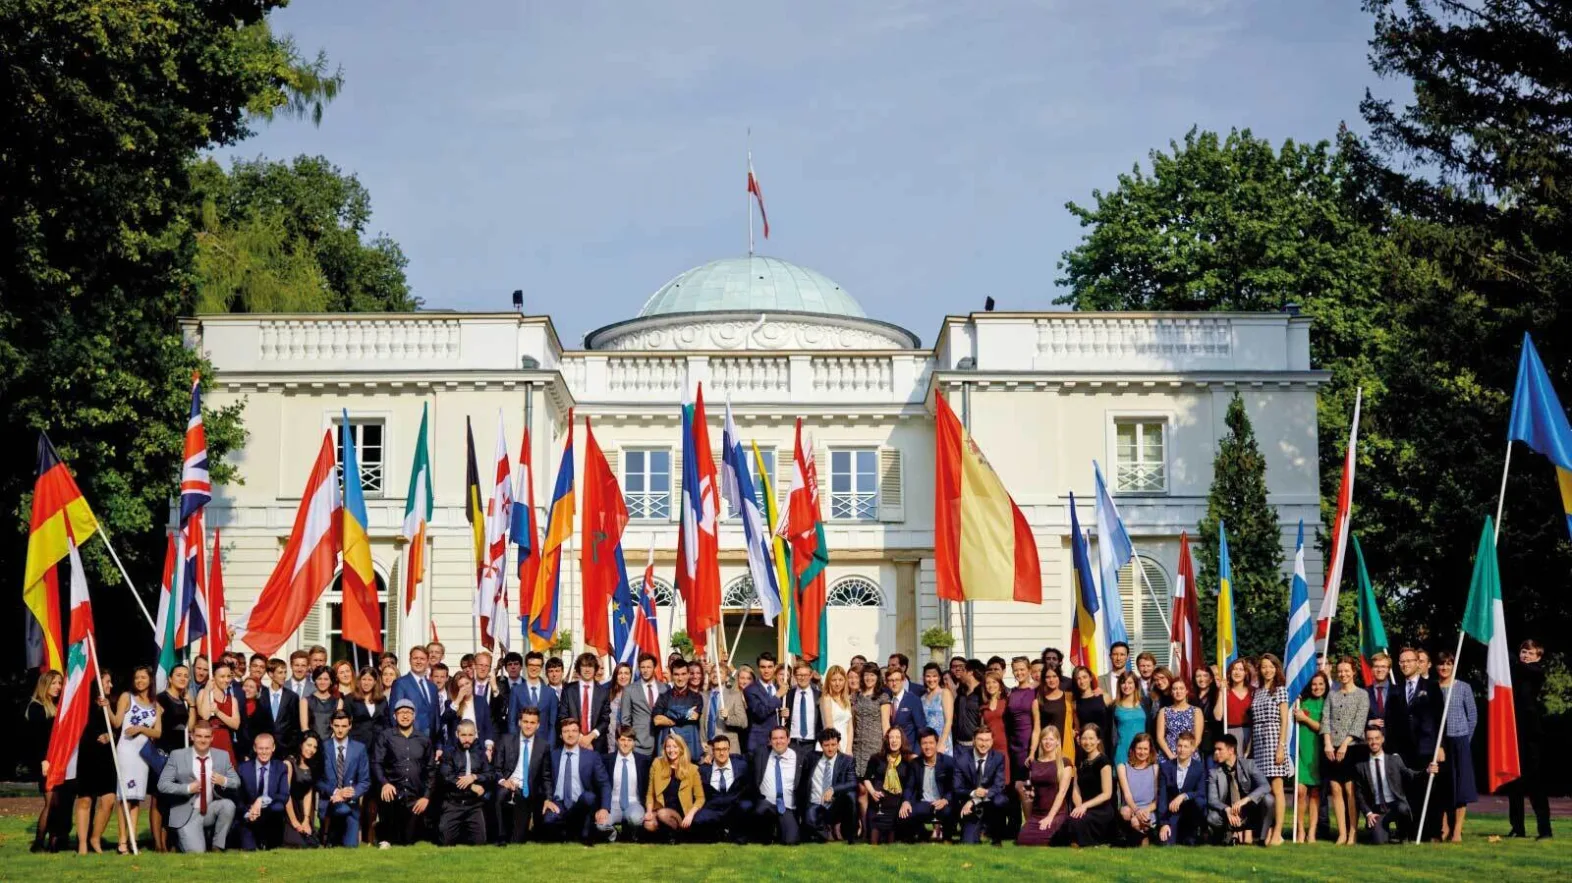 Group of people posing with large flags of multiple countries